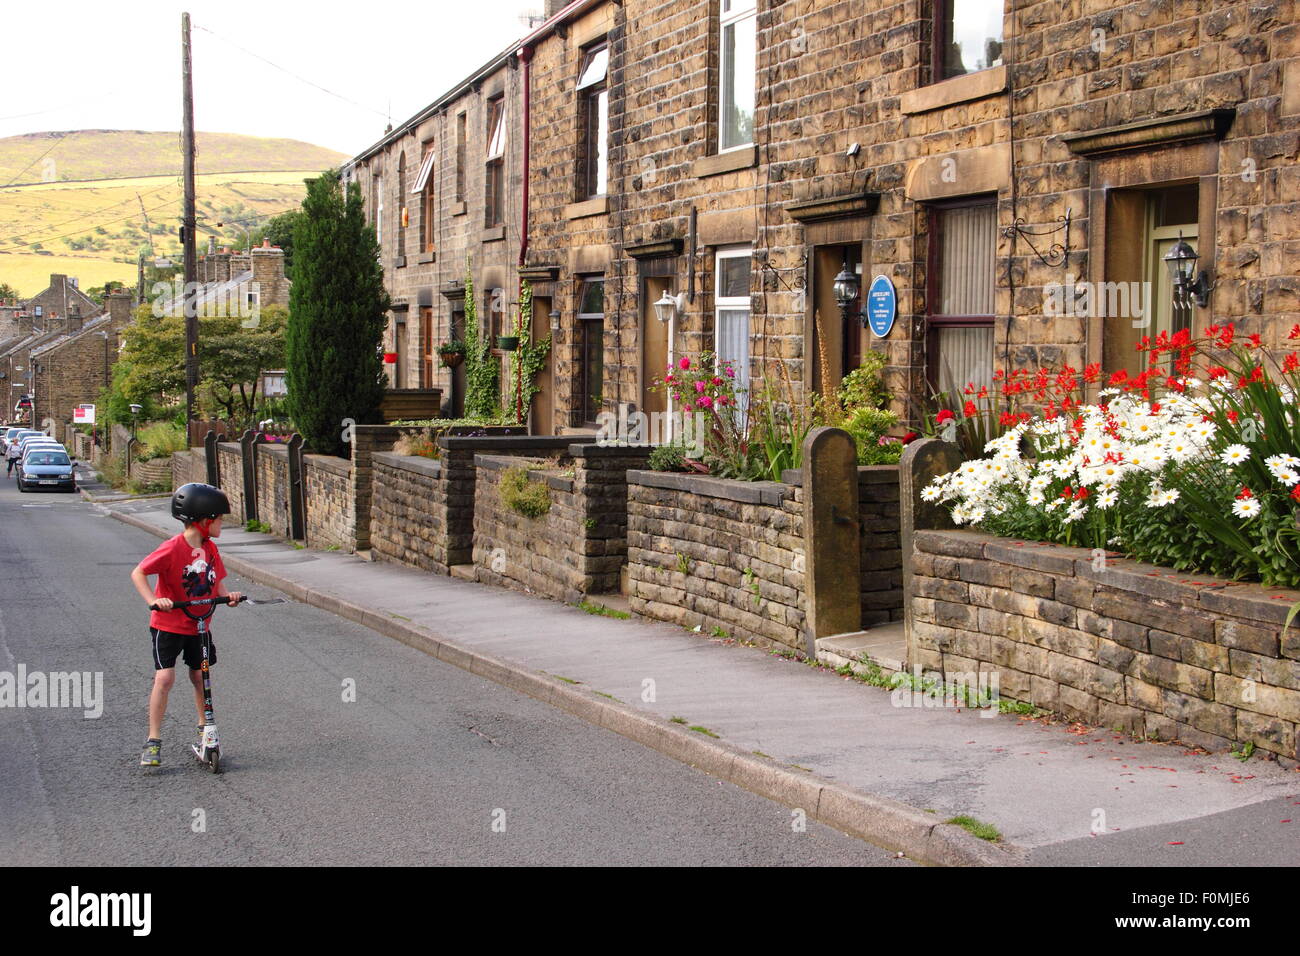 A boy plays on a scooter by terraced houses on Kinder Road in Hayfield village, Peak District, Derbyshire, north England UK Stock Photo